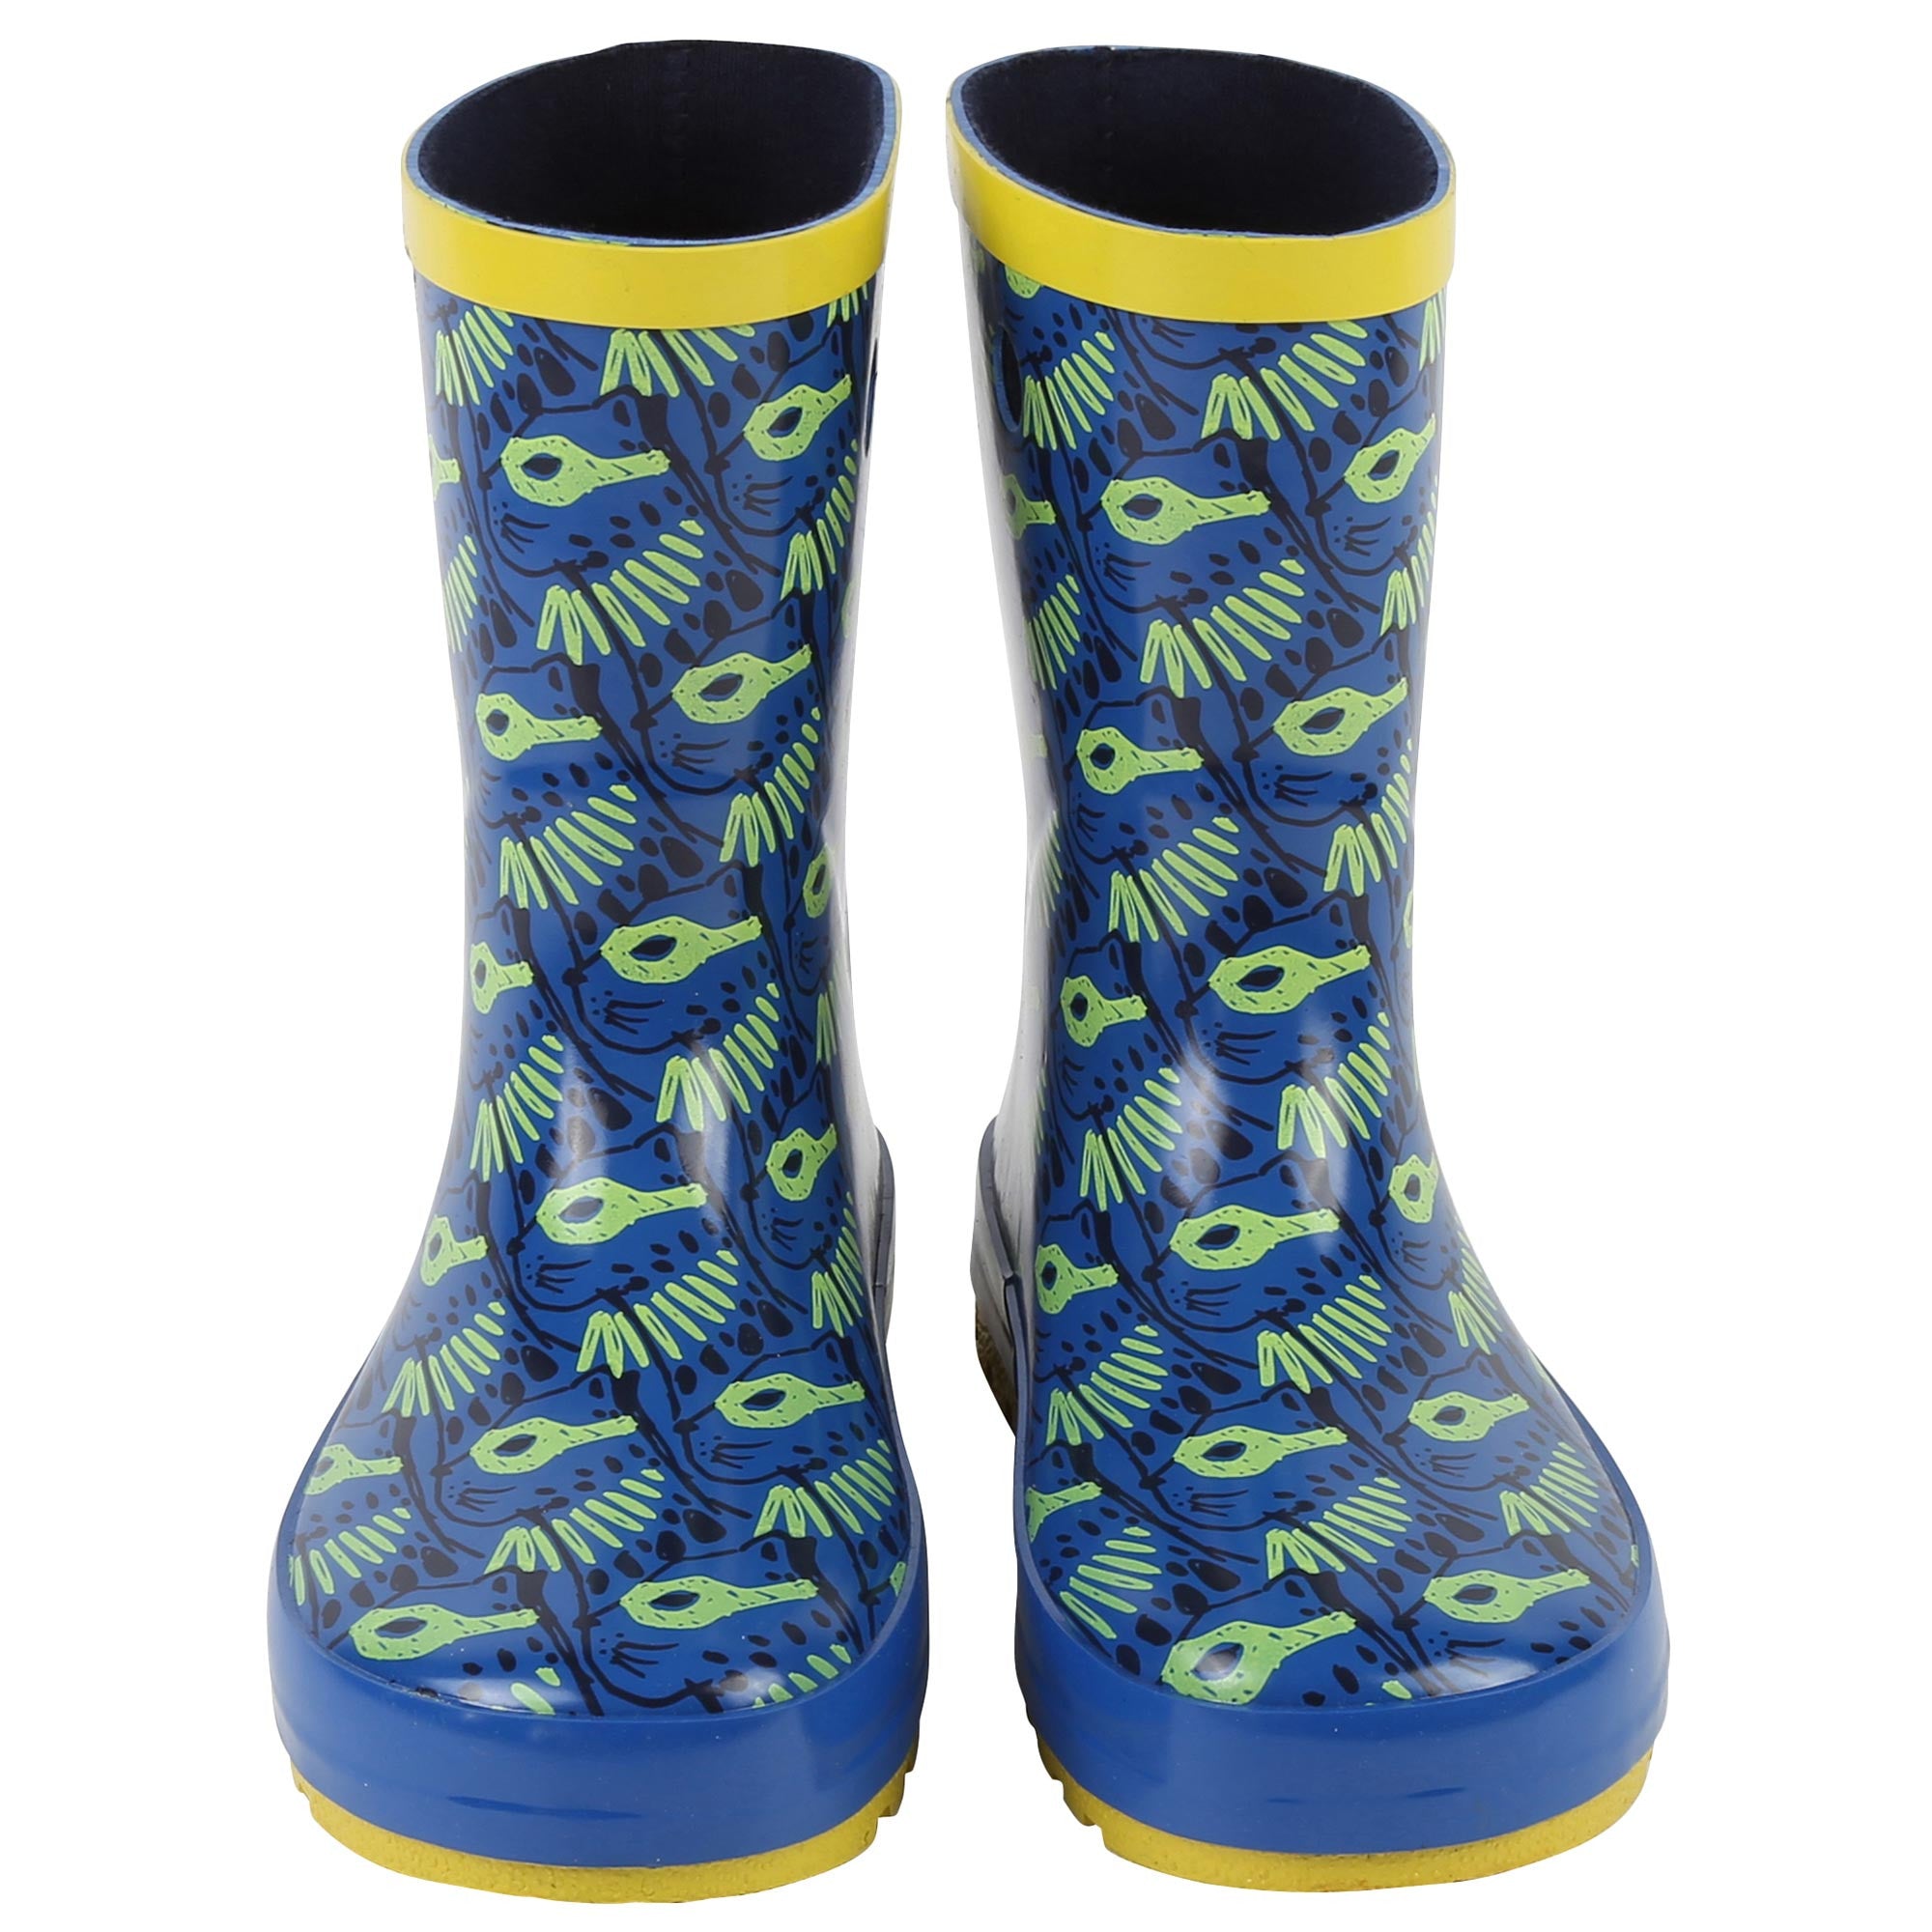 Boys Blue Leopard Rainboots with Yellow Mask